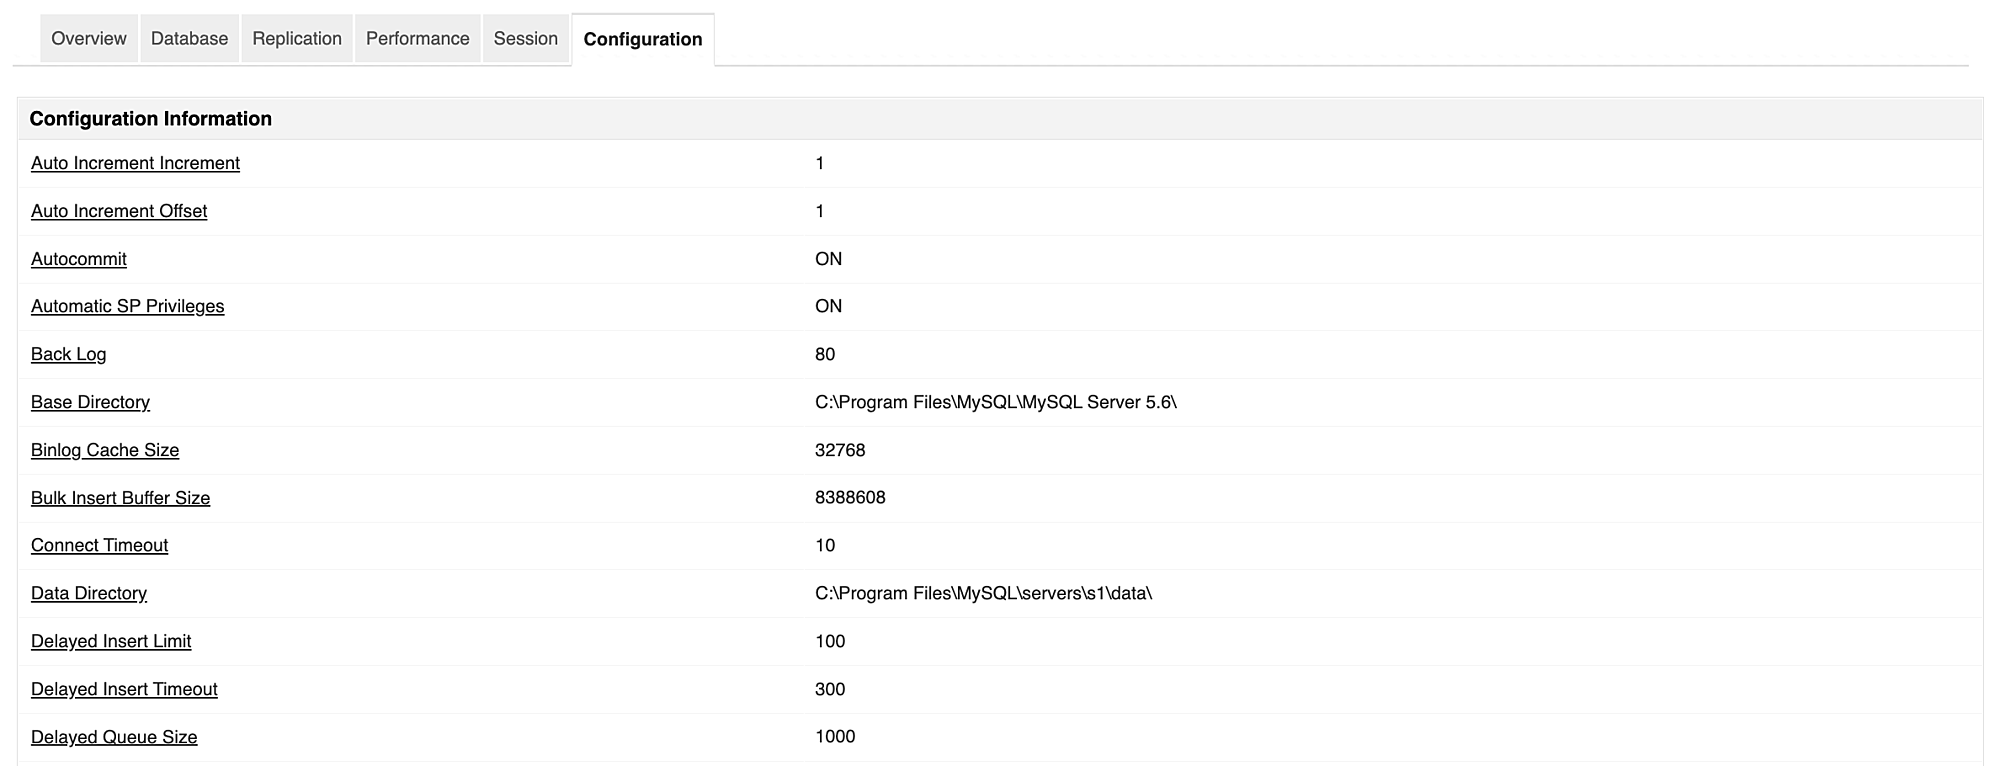 Applications Manager's MySQL monitoring dashboard shows all your MySQL configurations